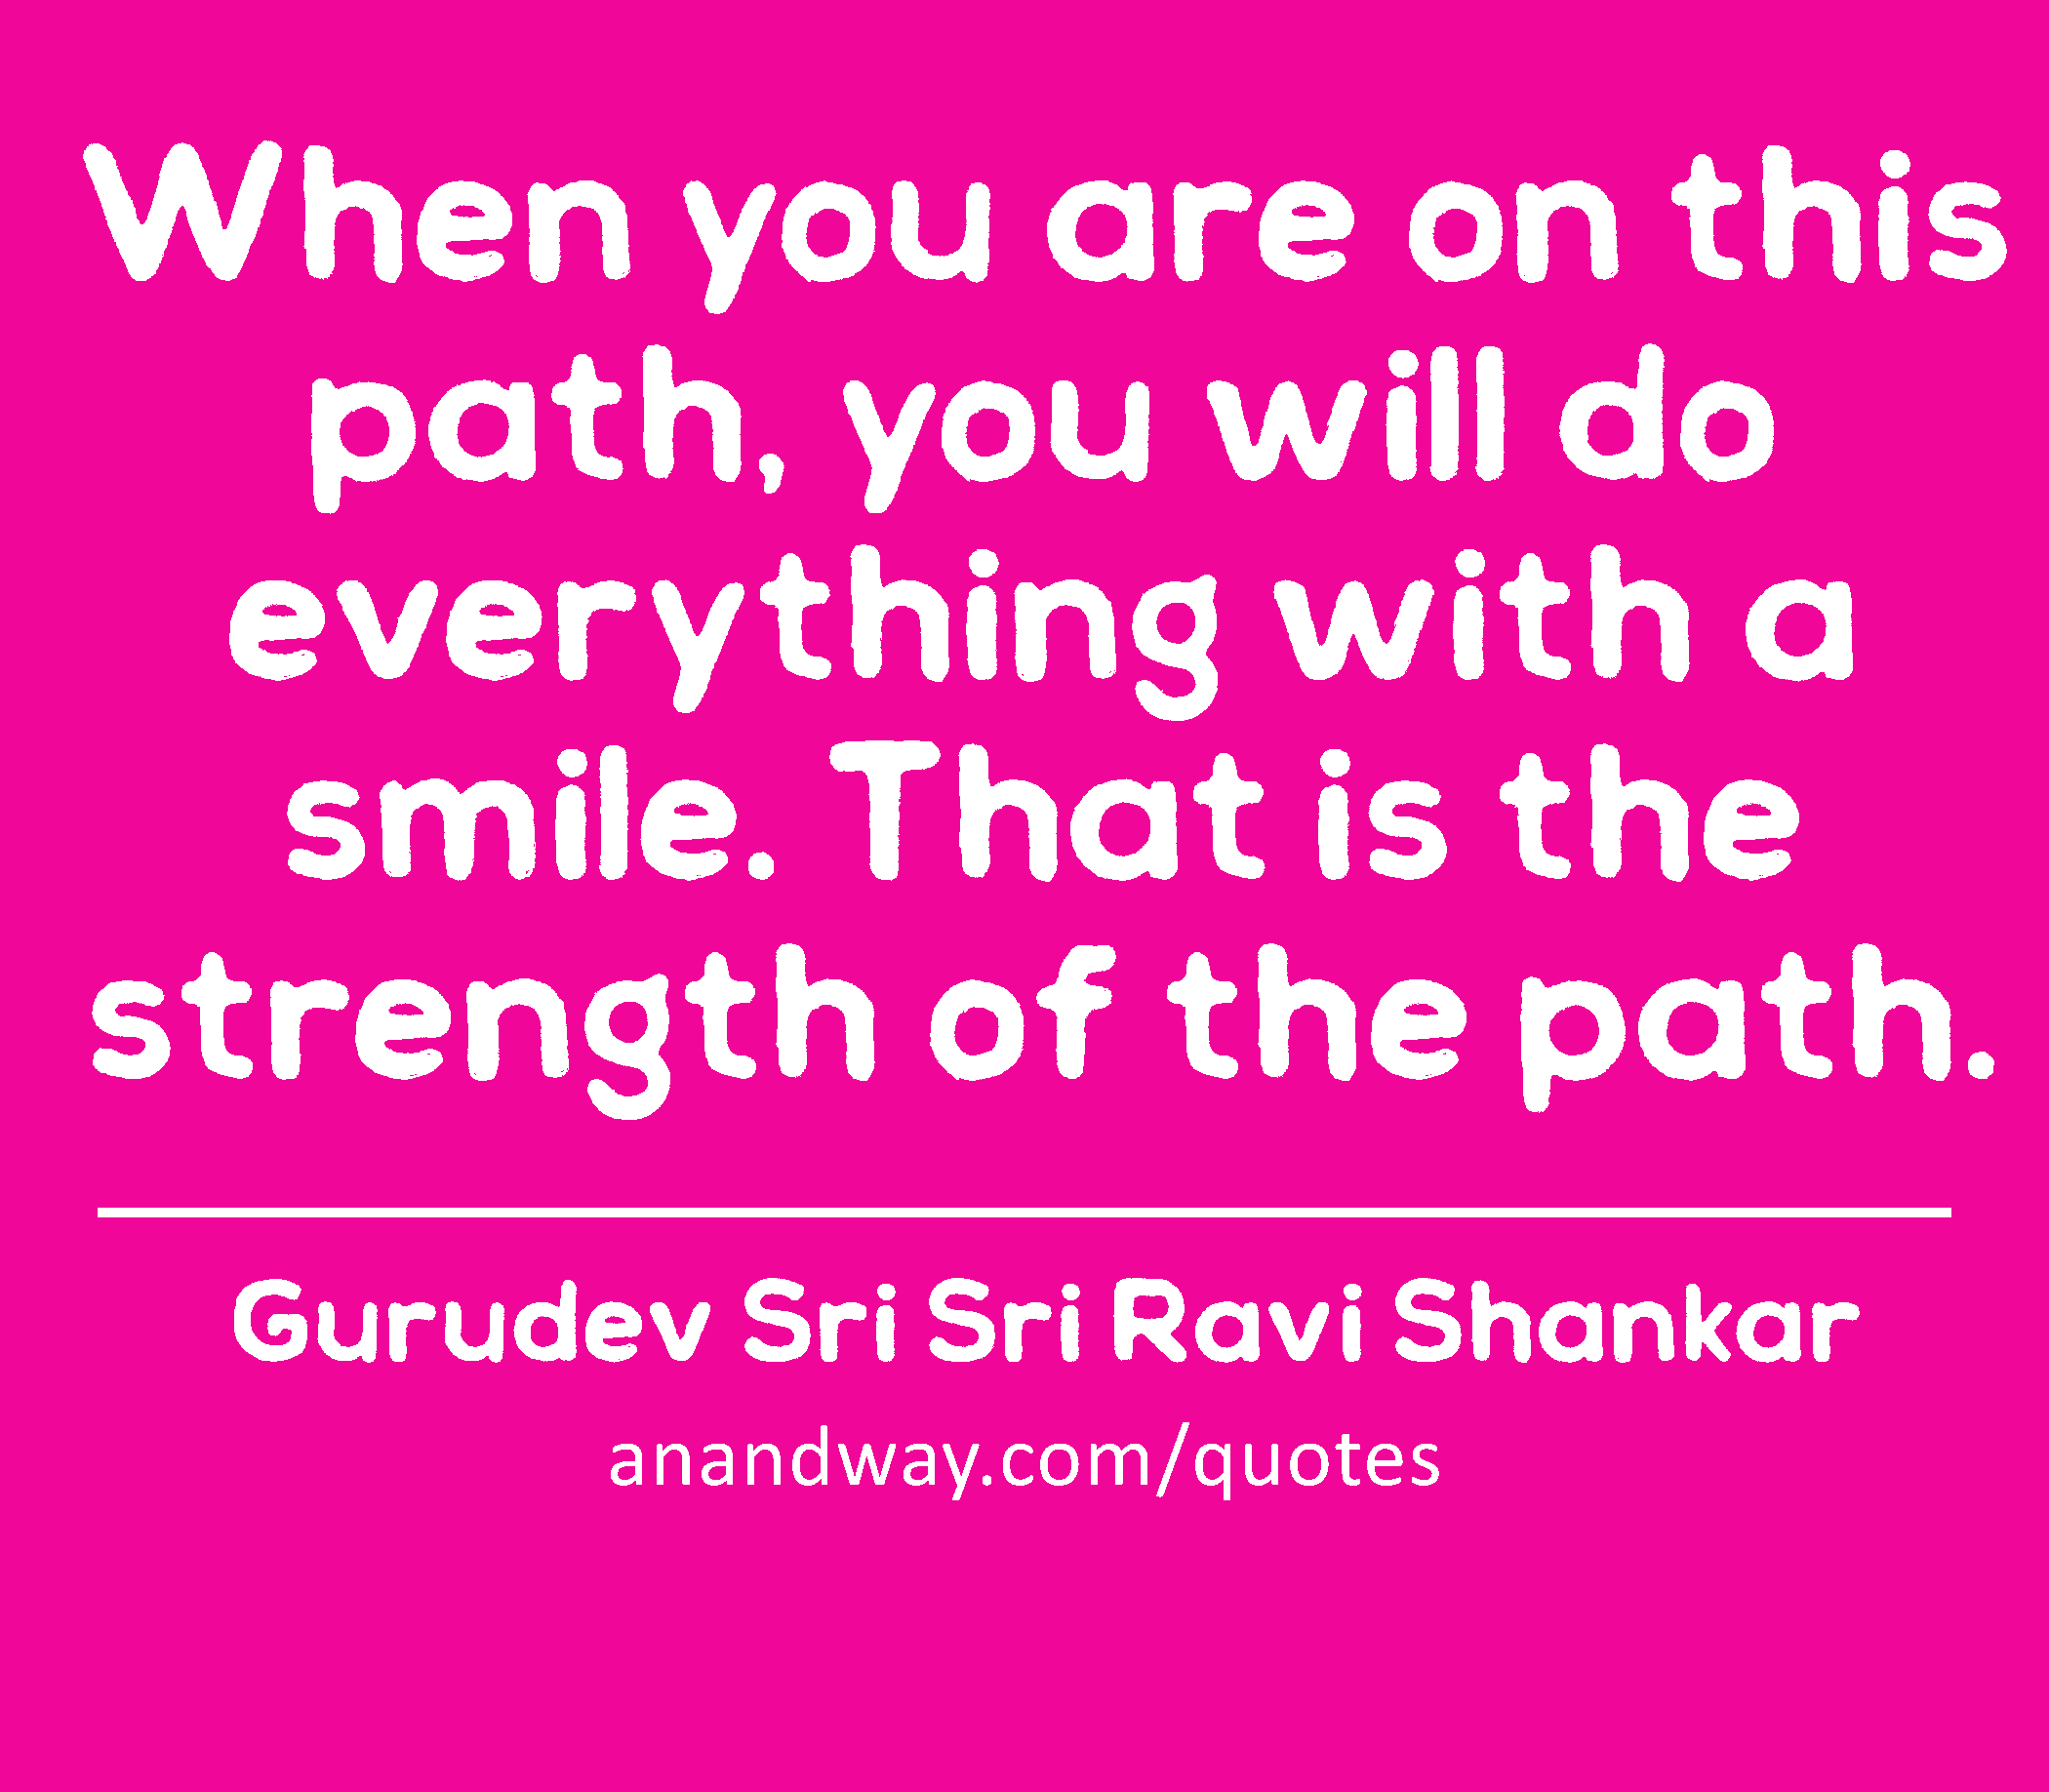 When you are on this path, you will do everything with a smile. That is the strength of the path.
 -Gurudev Sri Sri Ravi Shankar